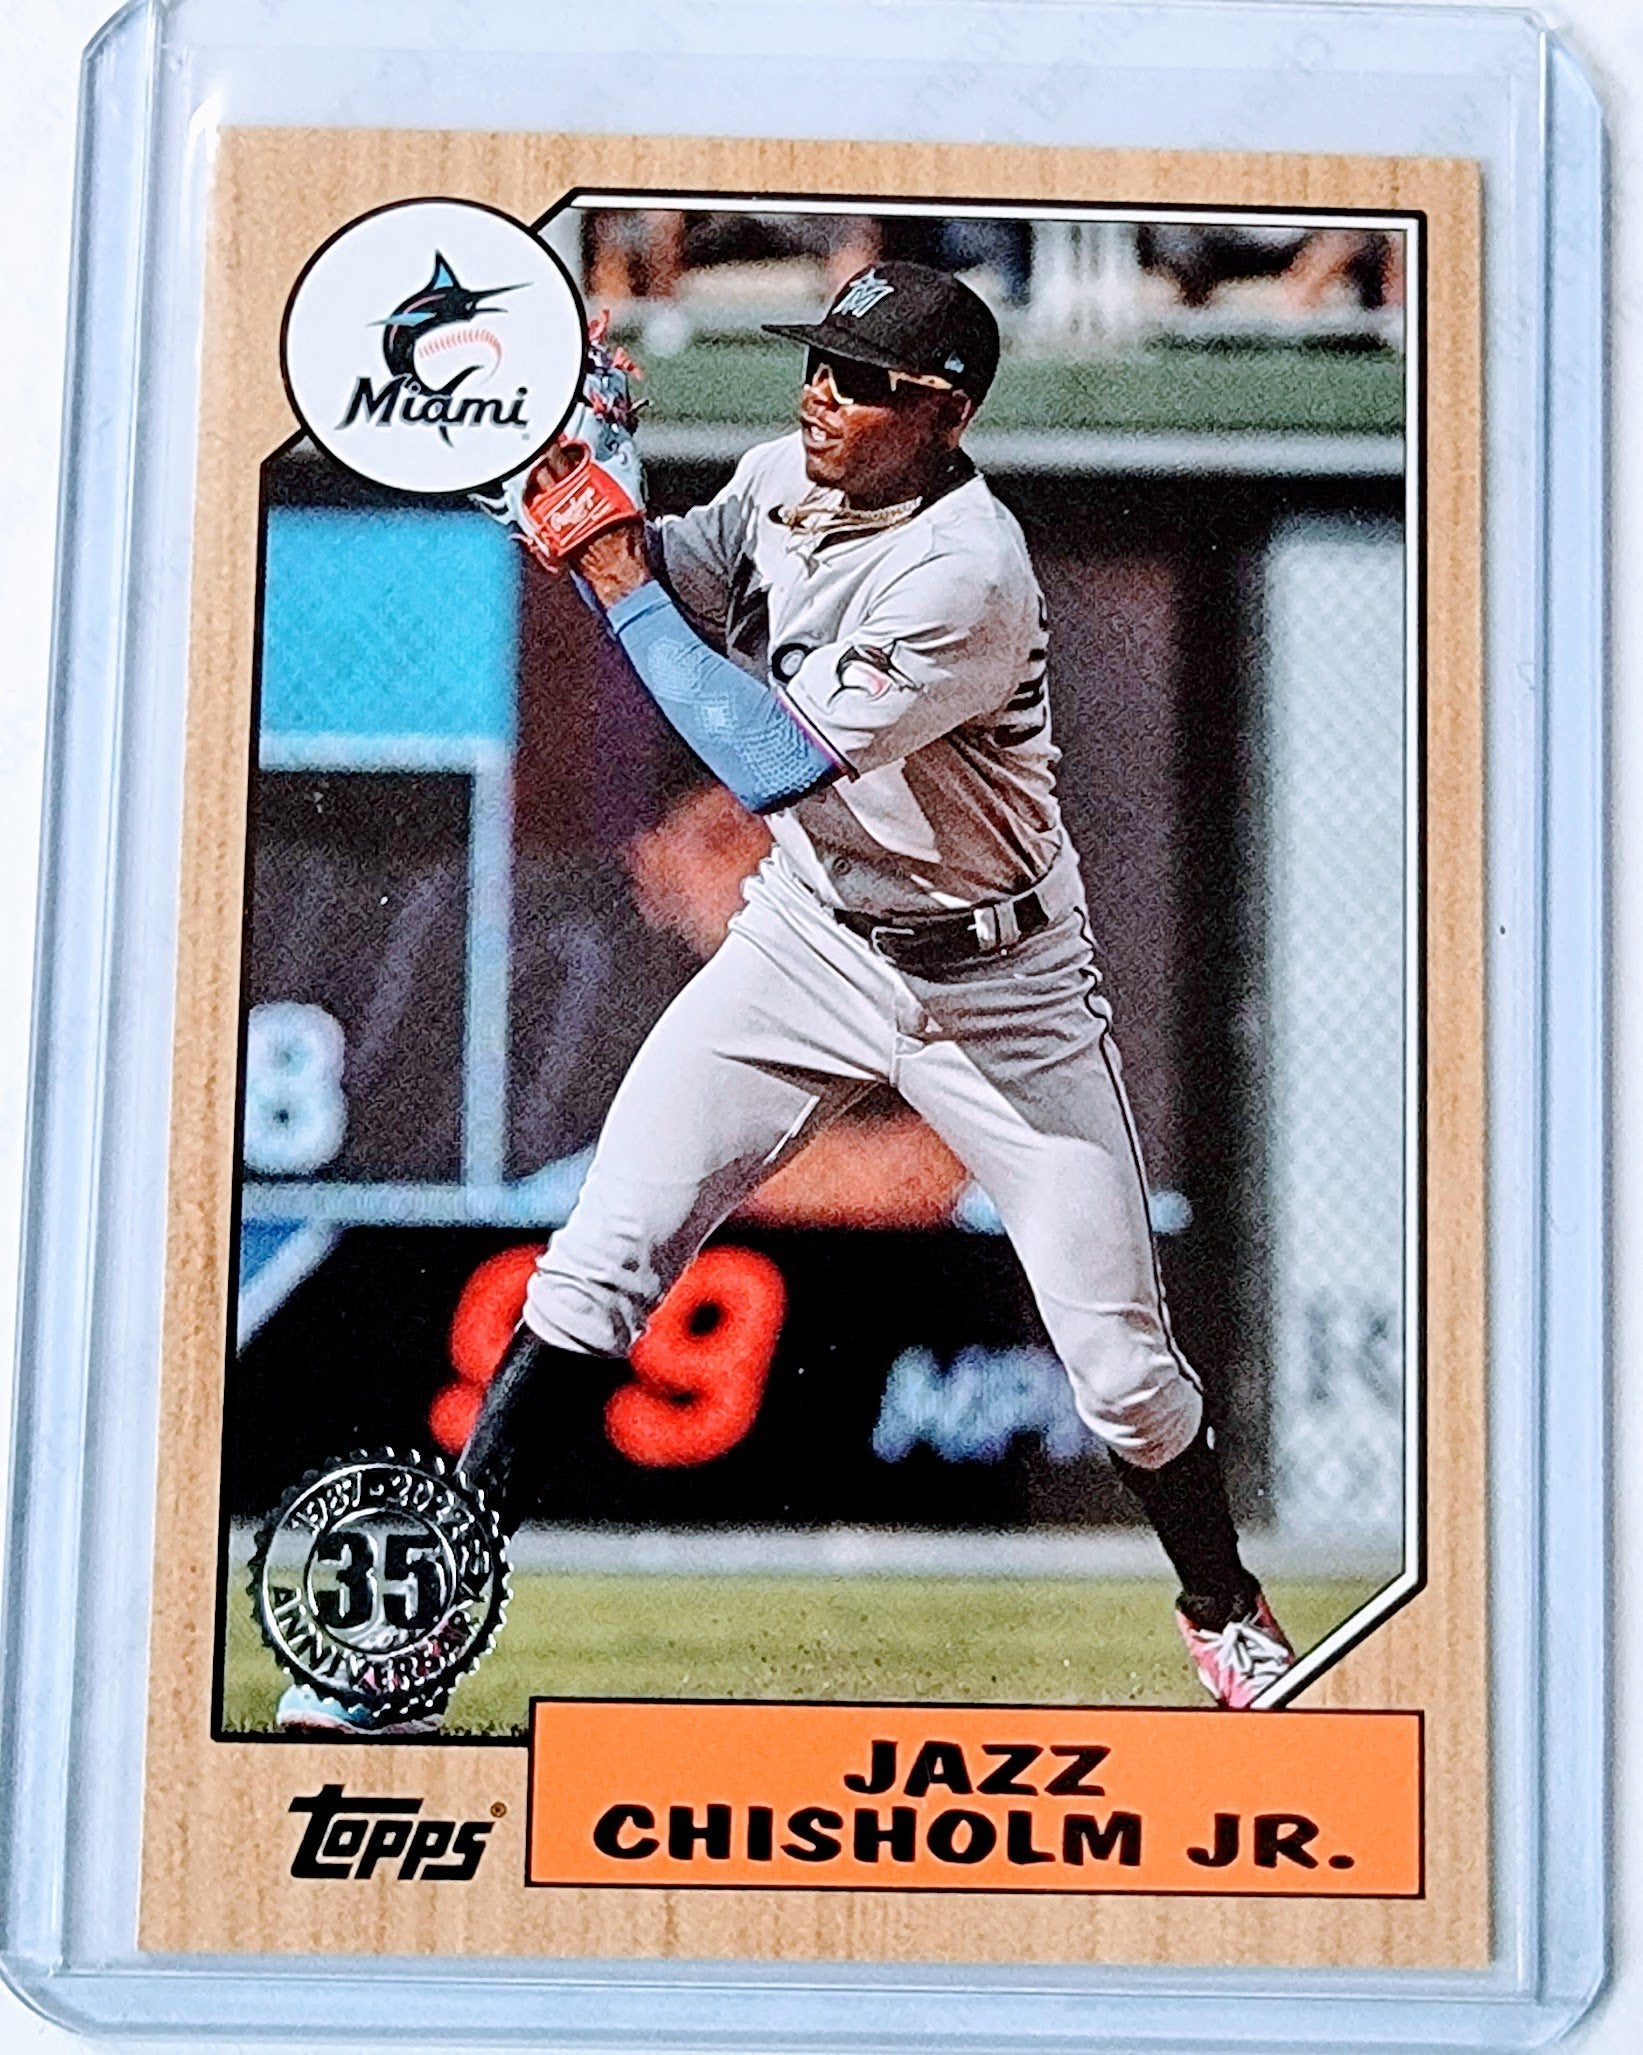 2022 Topps Jazz Chisolm Jr Baseball 35th Anniversary Baseball Trading Card GRB1 simple Xclusive Collectibles   